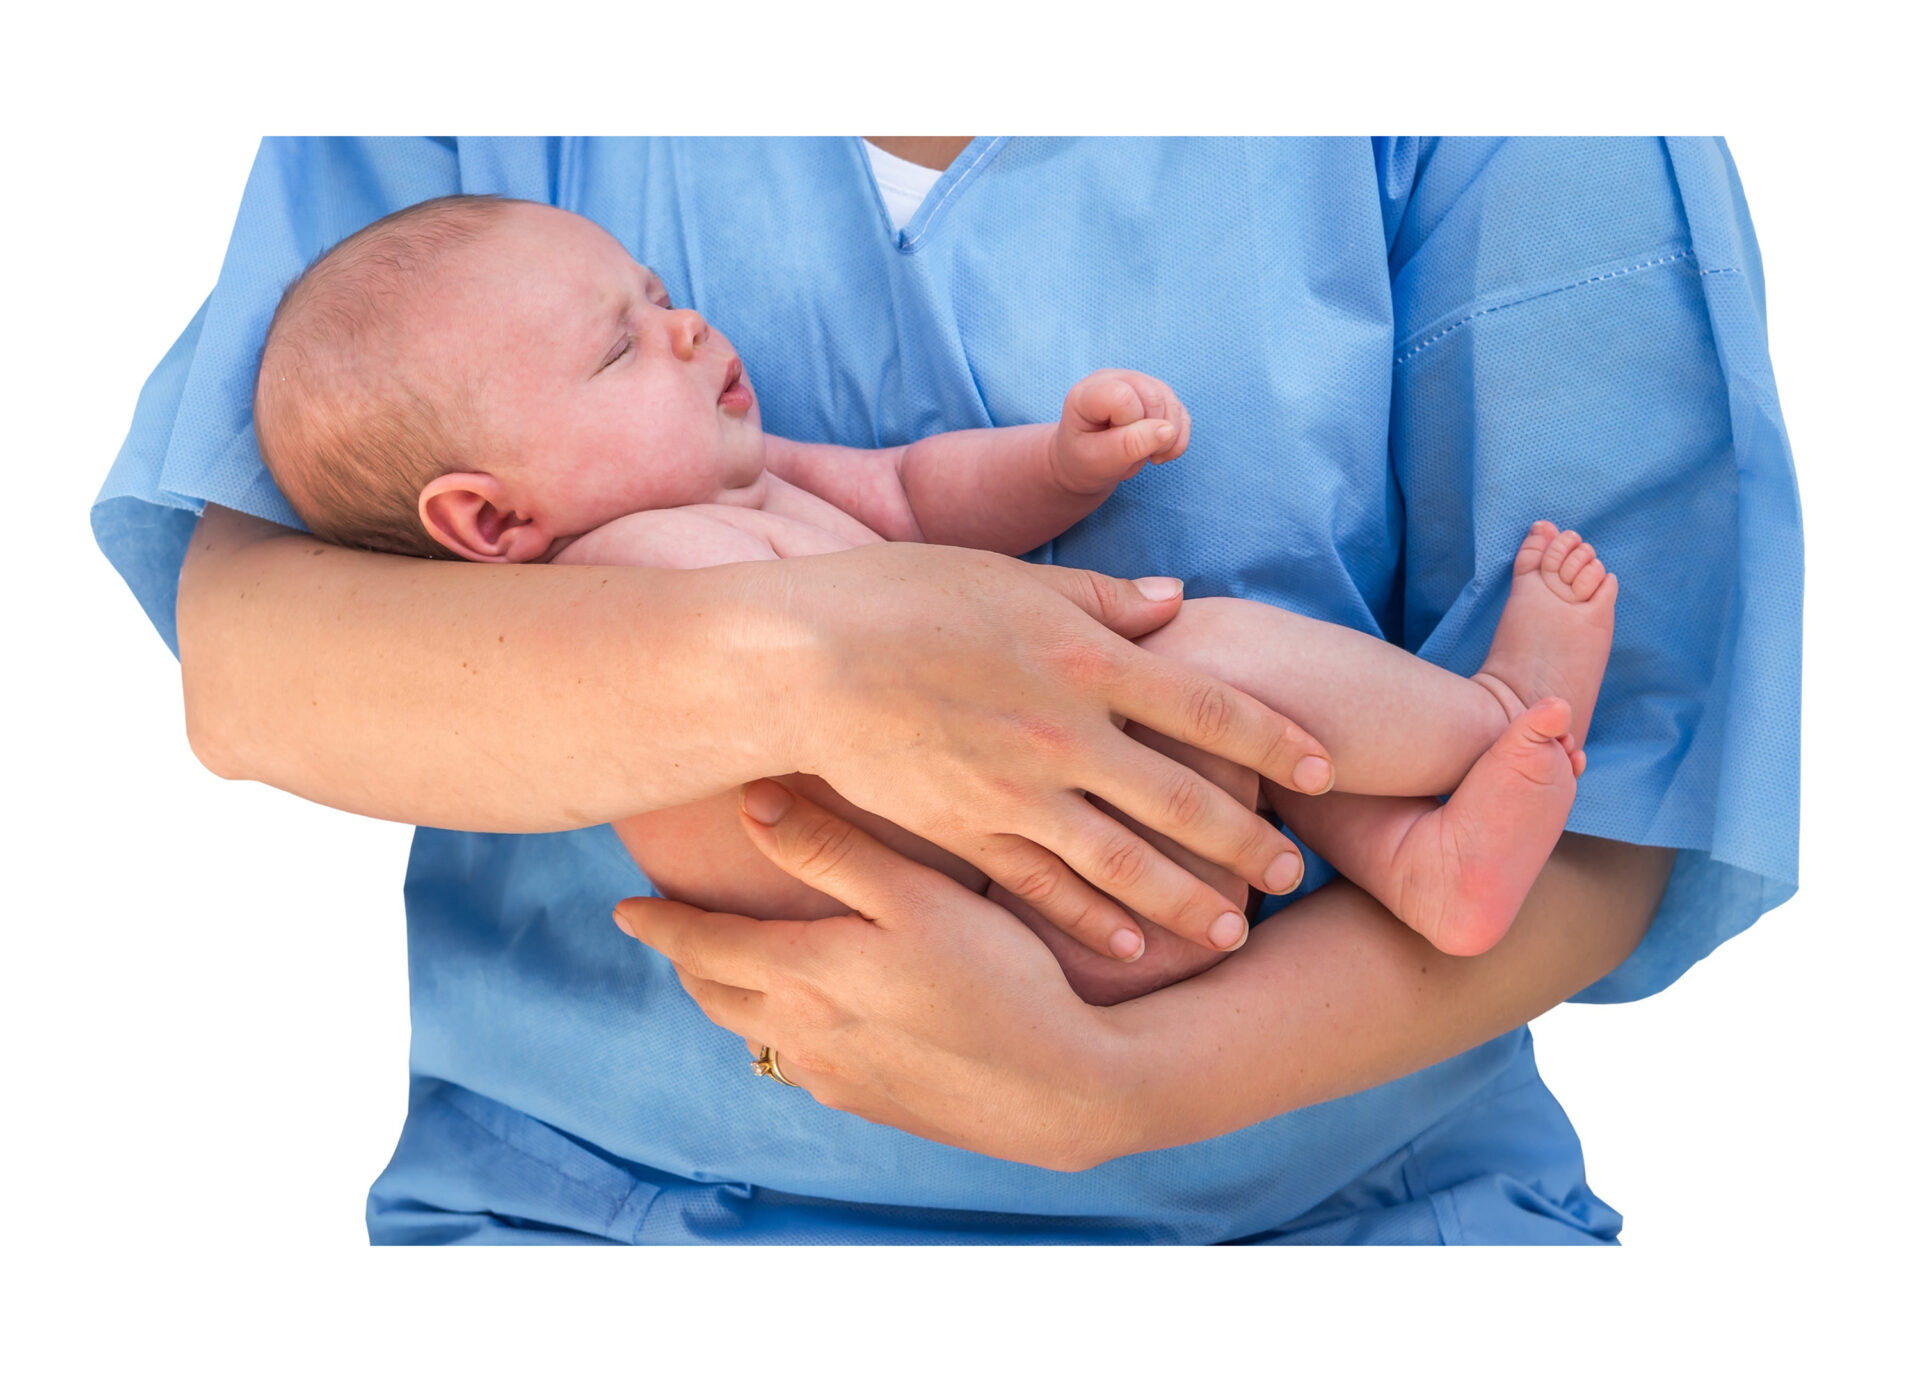 person in scrubs holding a baby